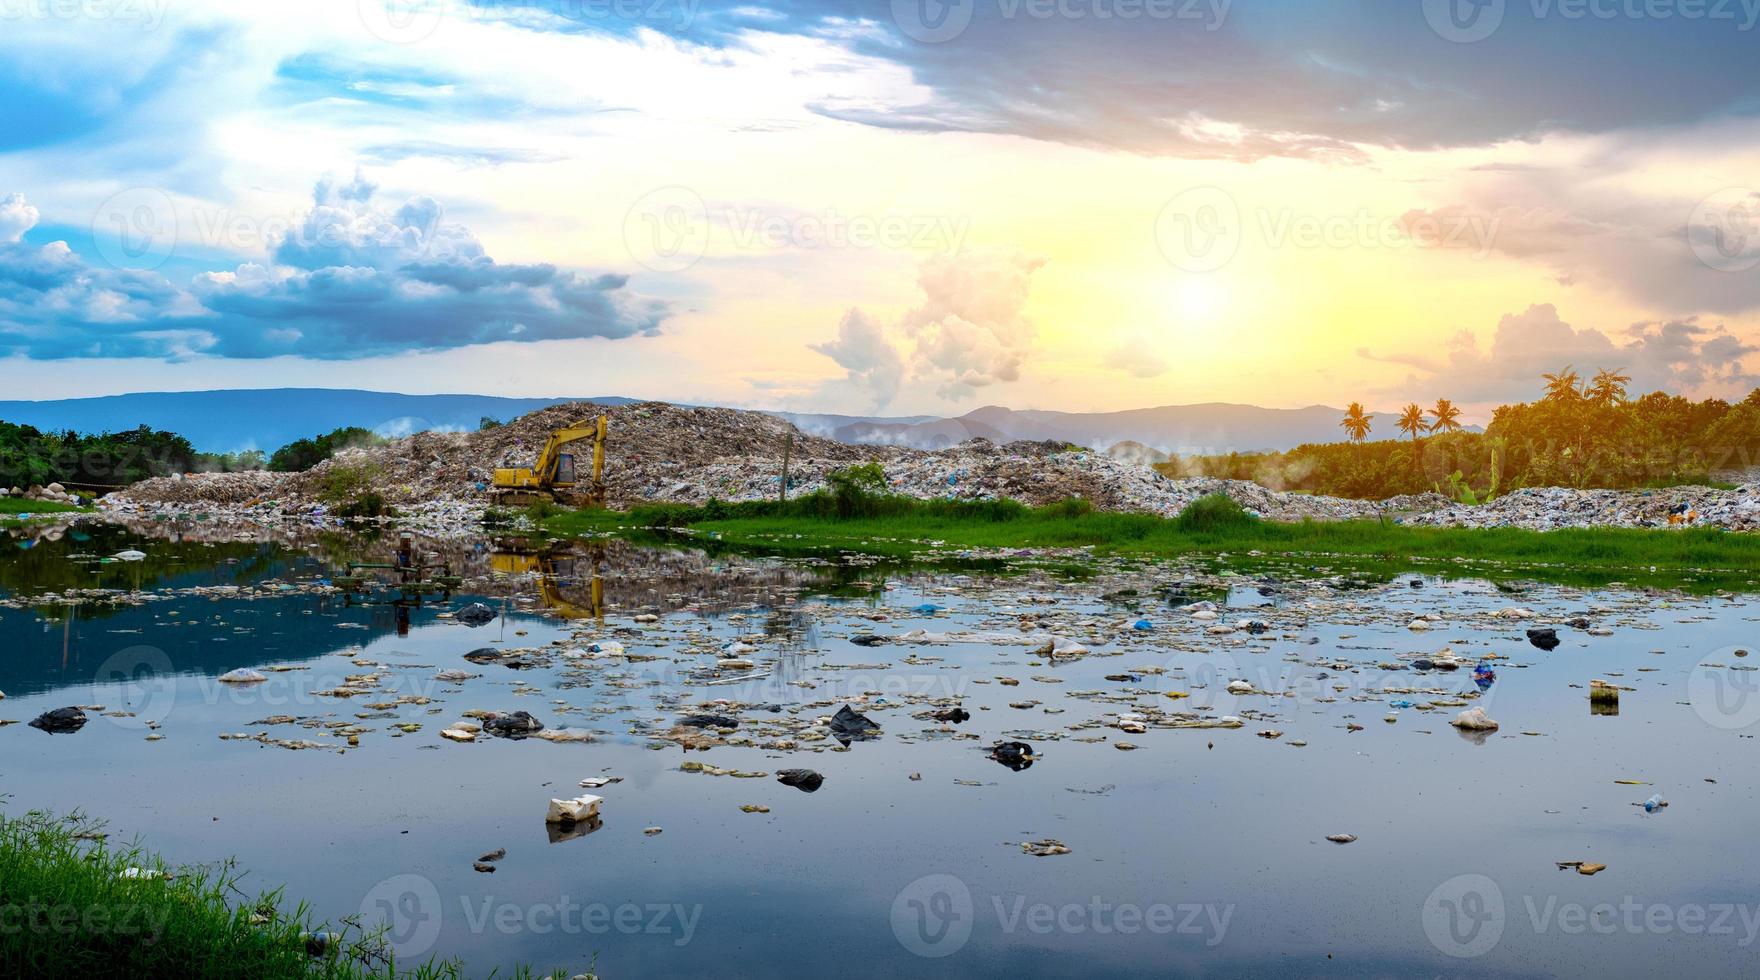 Polluted water and mountain large garbage pile and pollution photo